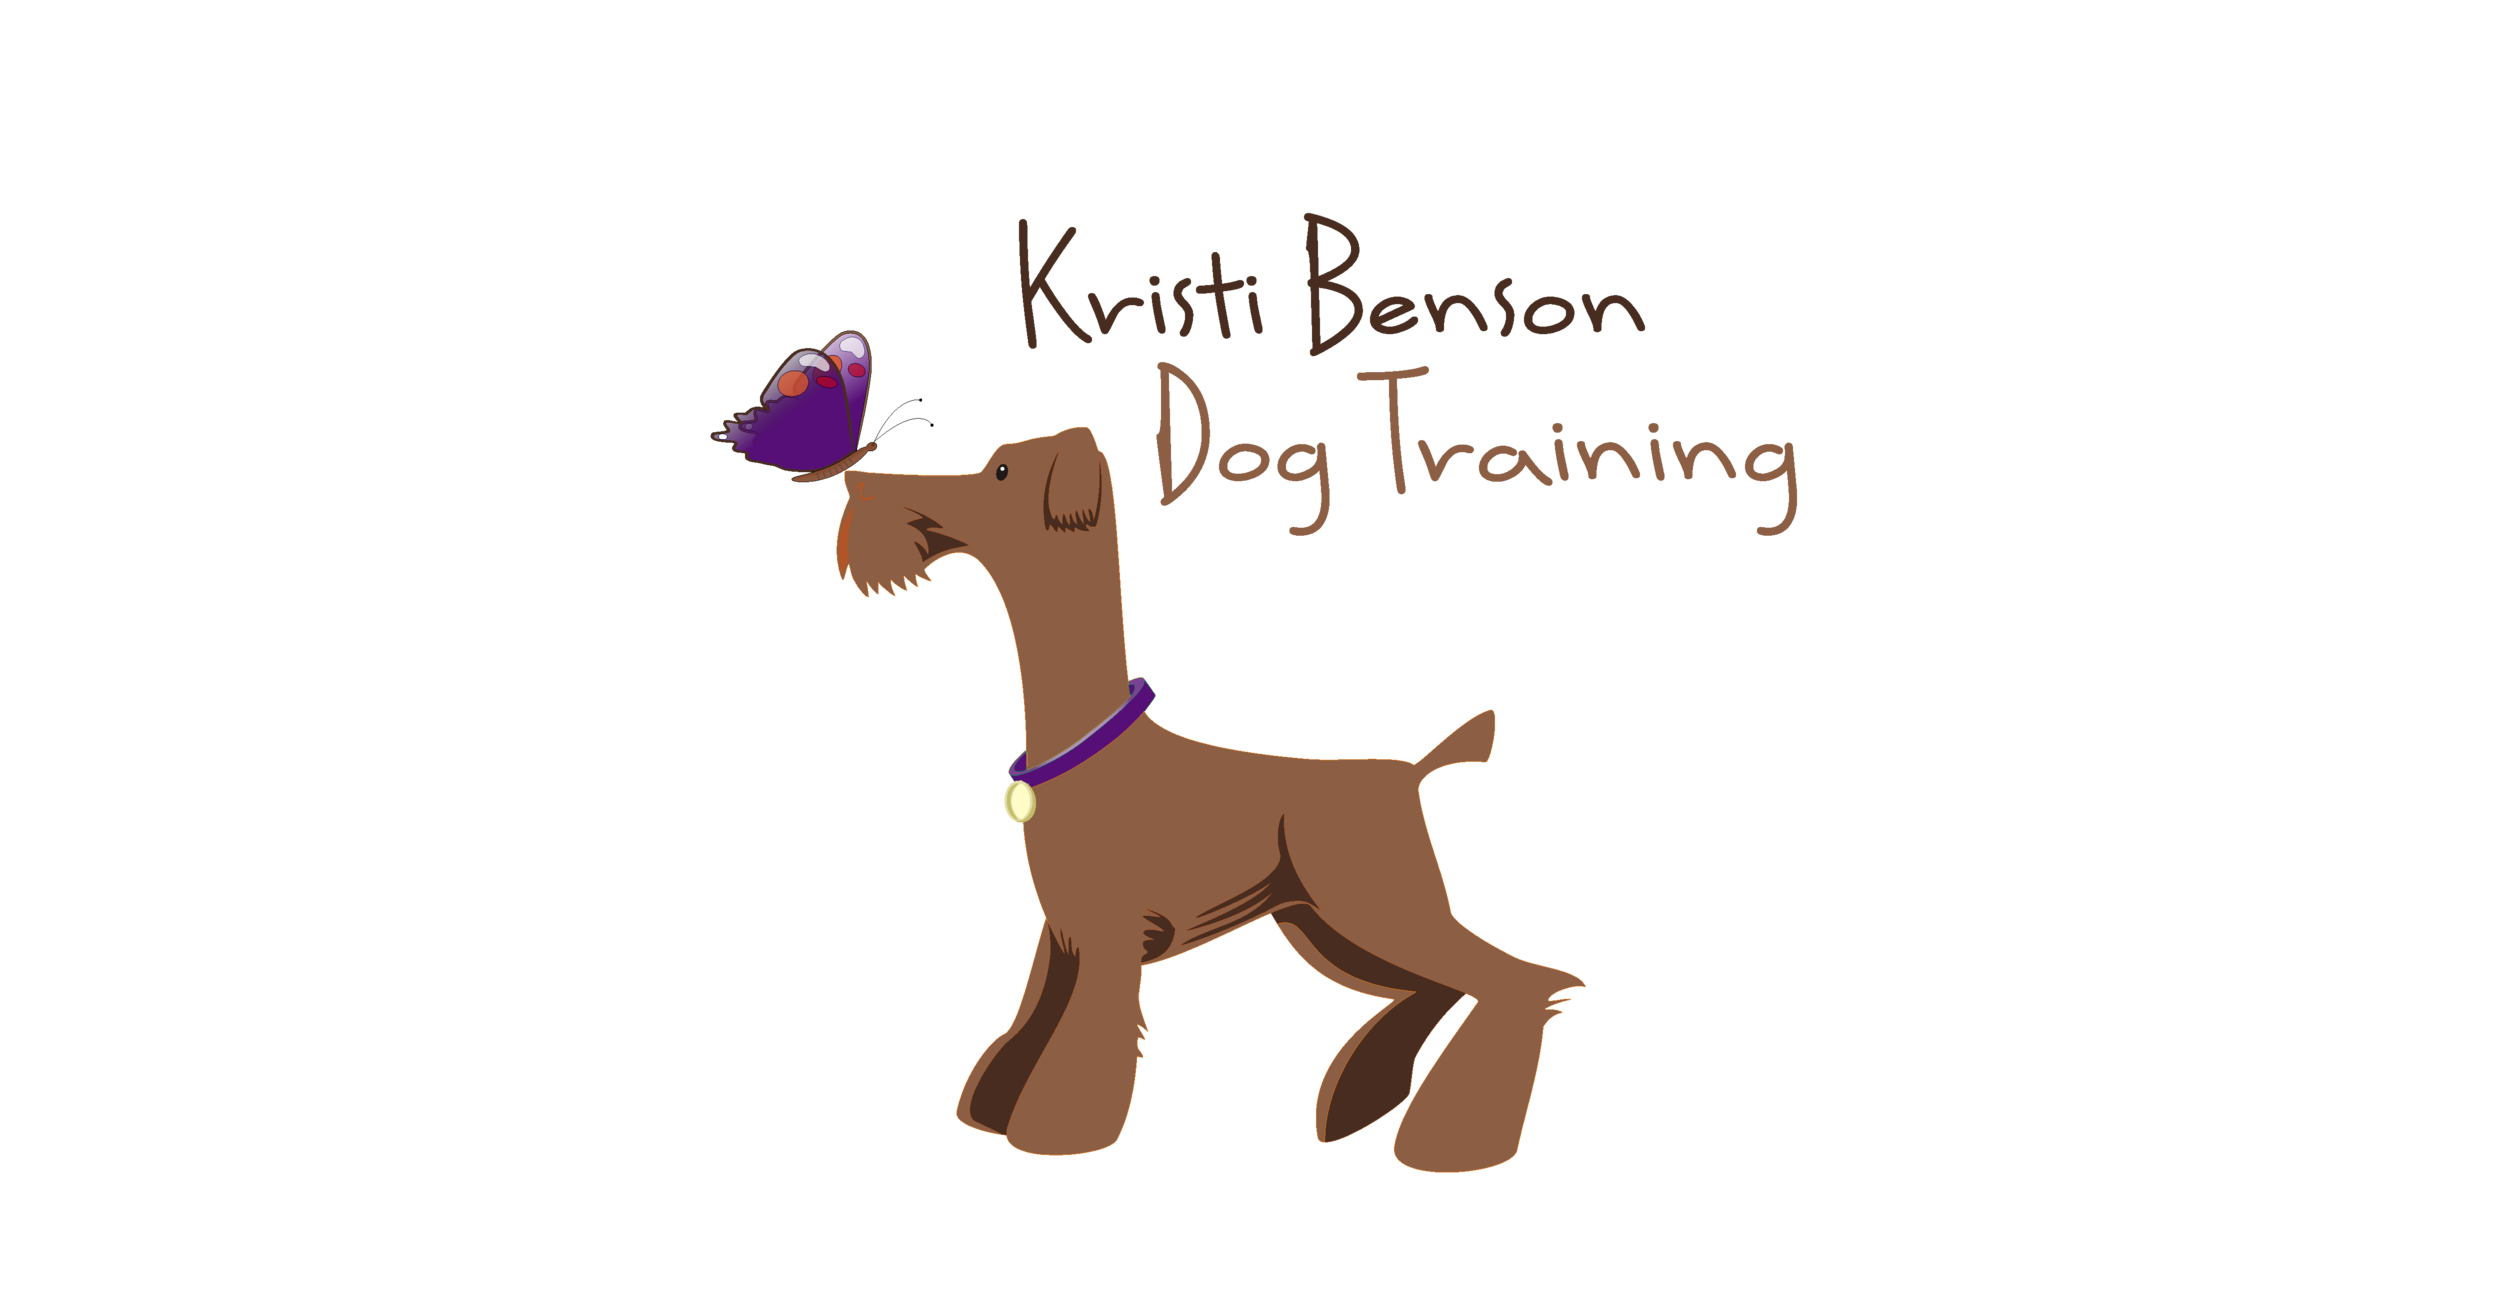 Calm Cool Collected Dog: Help for those jumpy mouthy dogs — Dog Training  with Kristi Benson